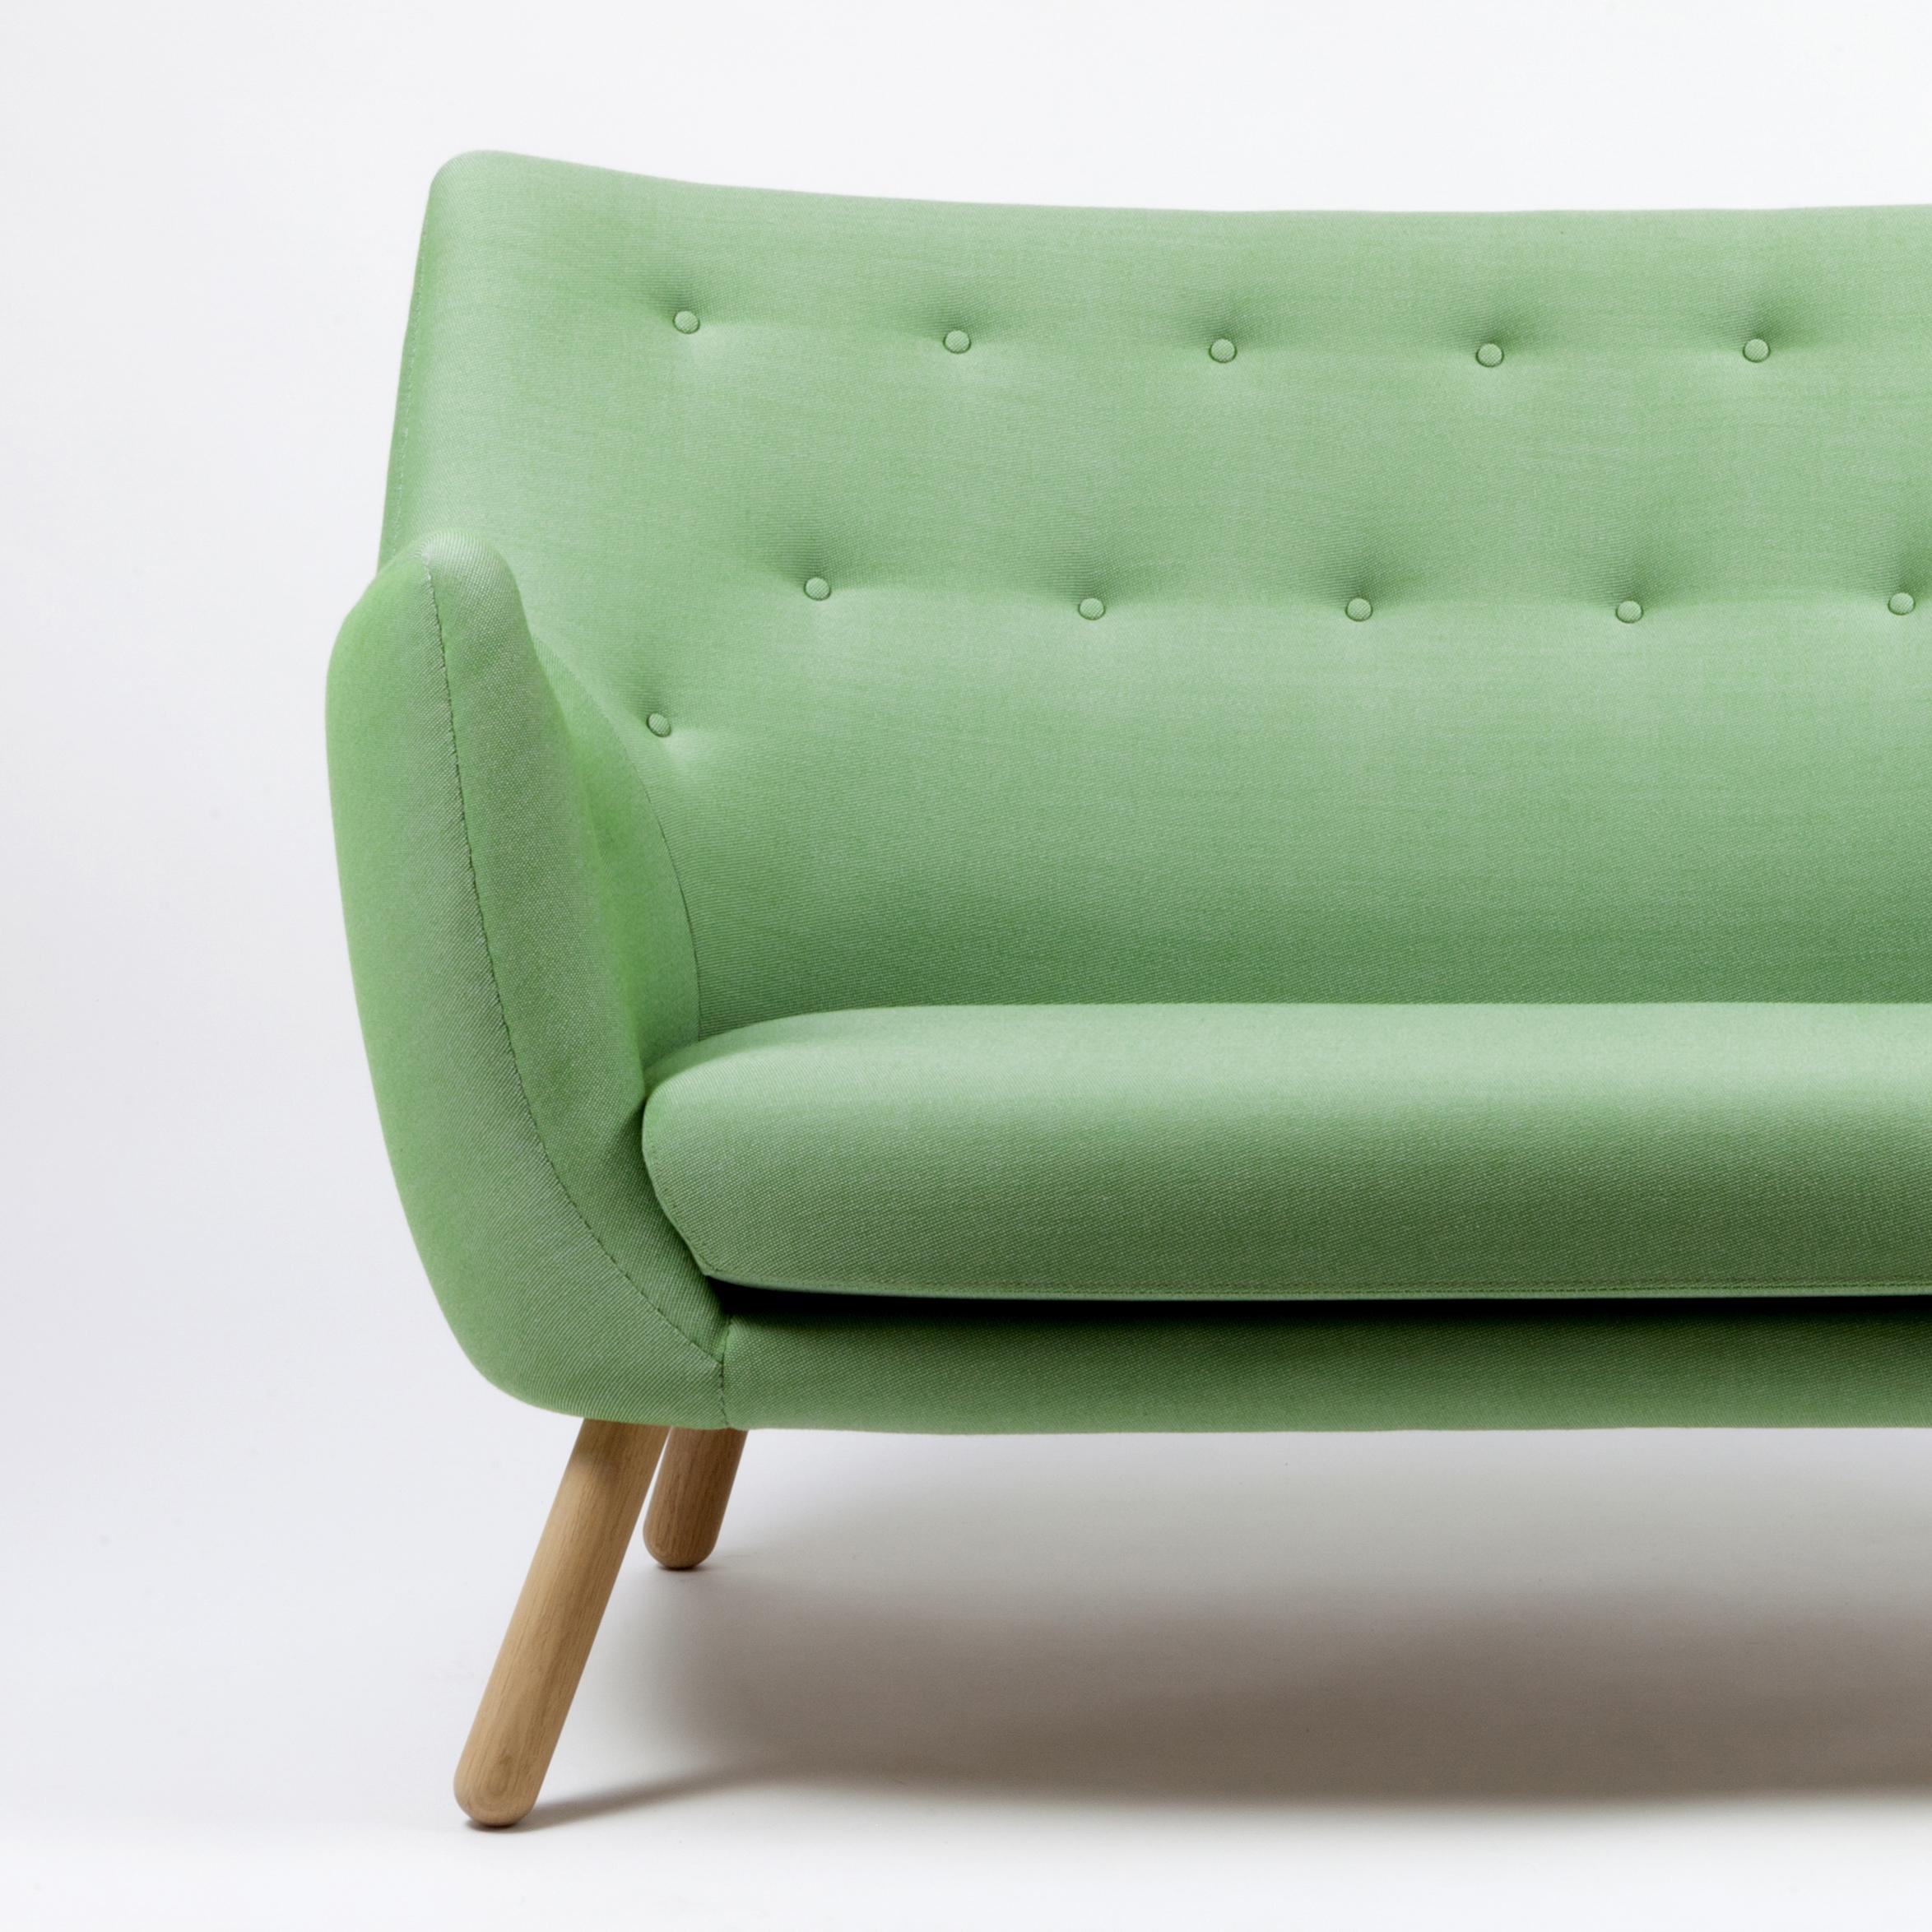 Sofa designed by Finn Juhl
Manufactured by One collection Finn Juhl, (Denmark)

Kvadrat Rime fabric

This small two-seat sofa first saw the light of day at the Copenhagen Cabinetmakers’ Guild Exhibition in 1941. It should be seen as a natural